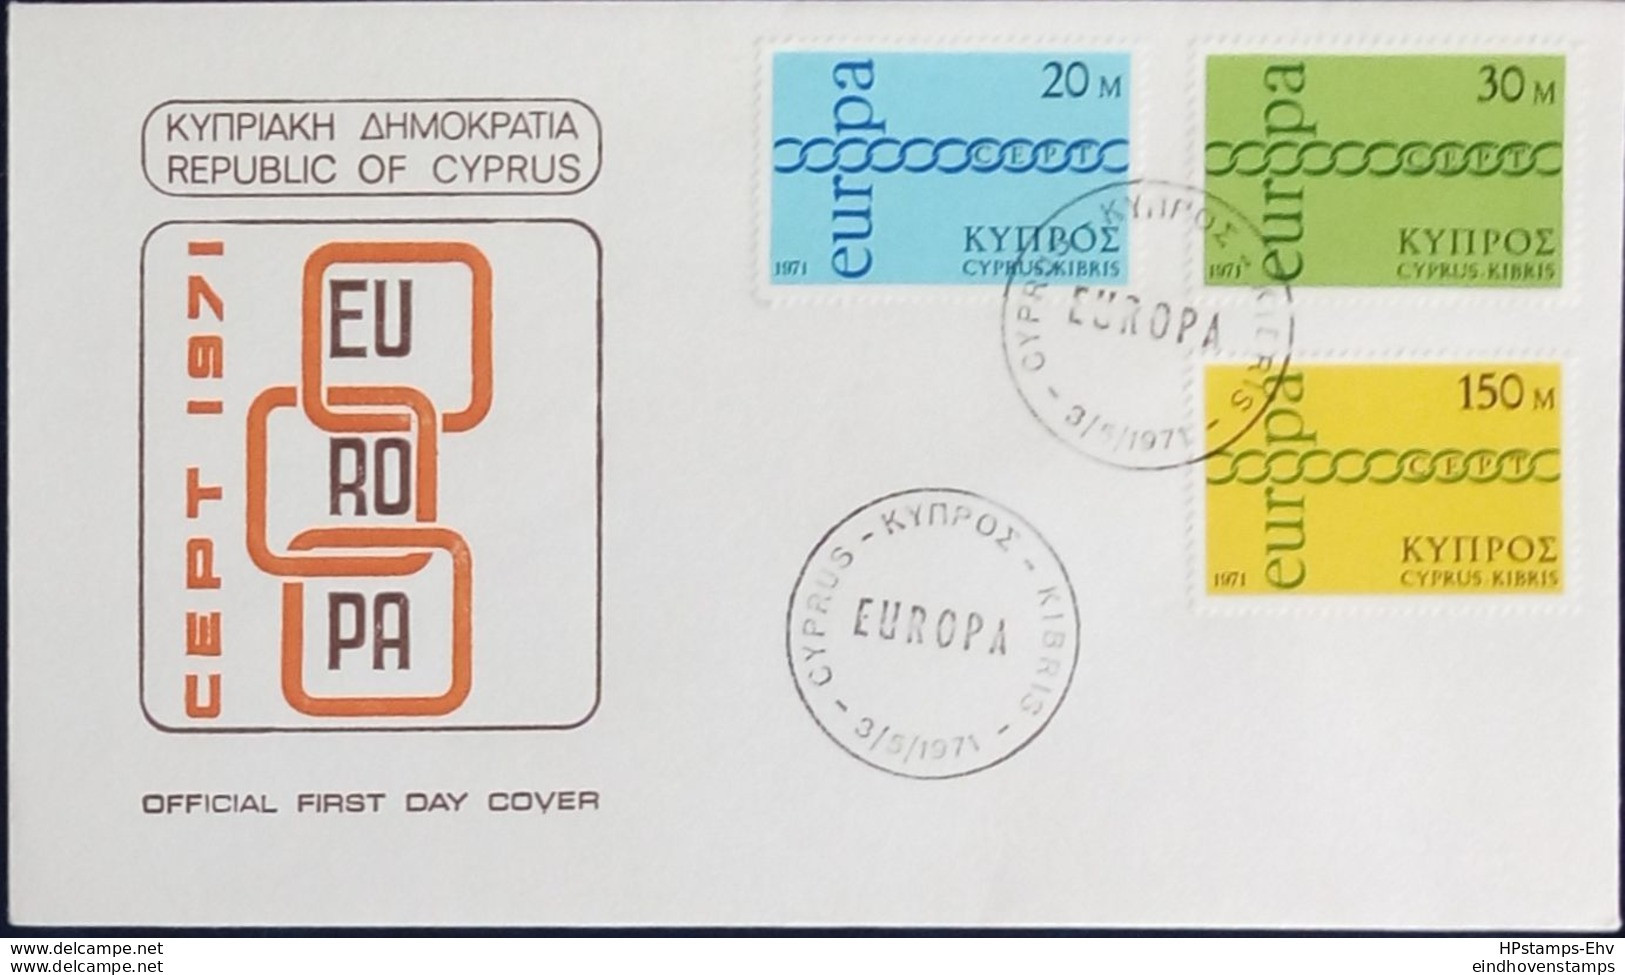 Cyprus 1971 Cept Issue FDC 2002.2635 - 1971